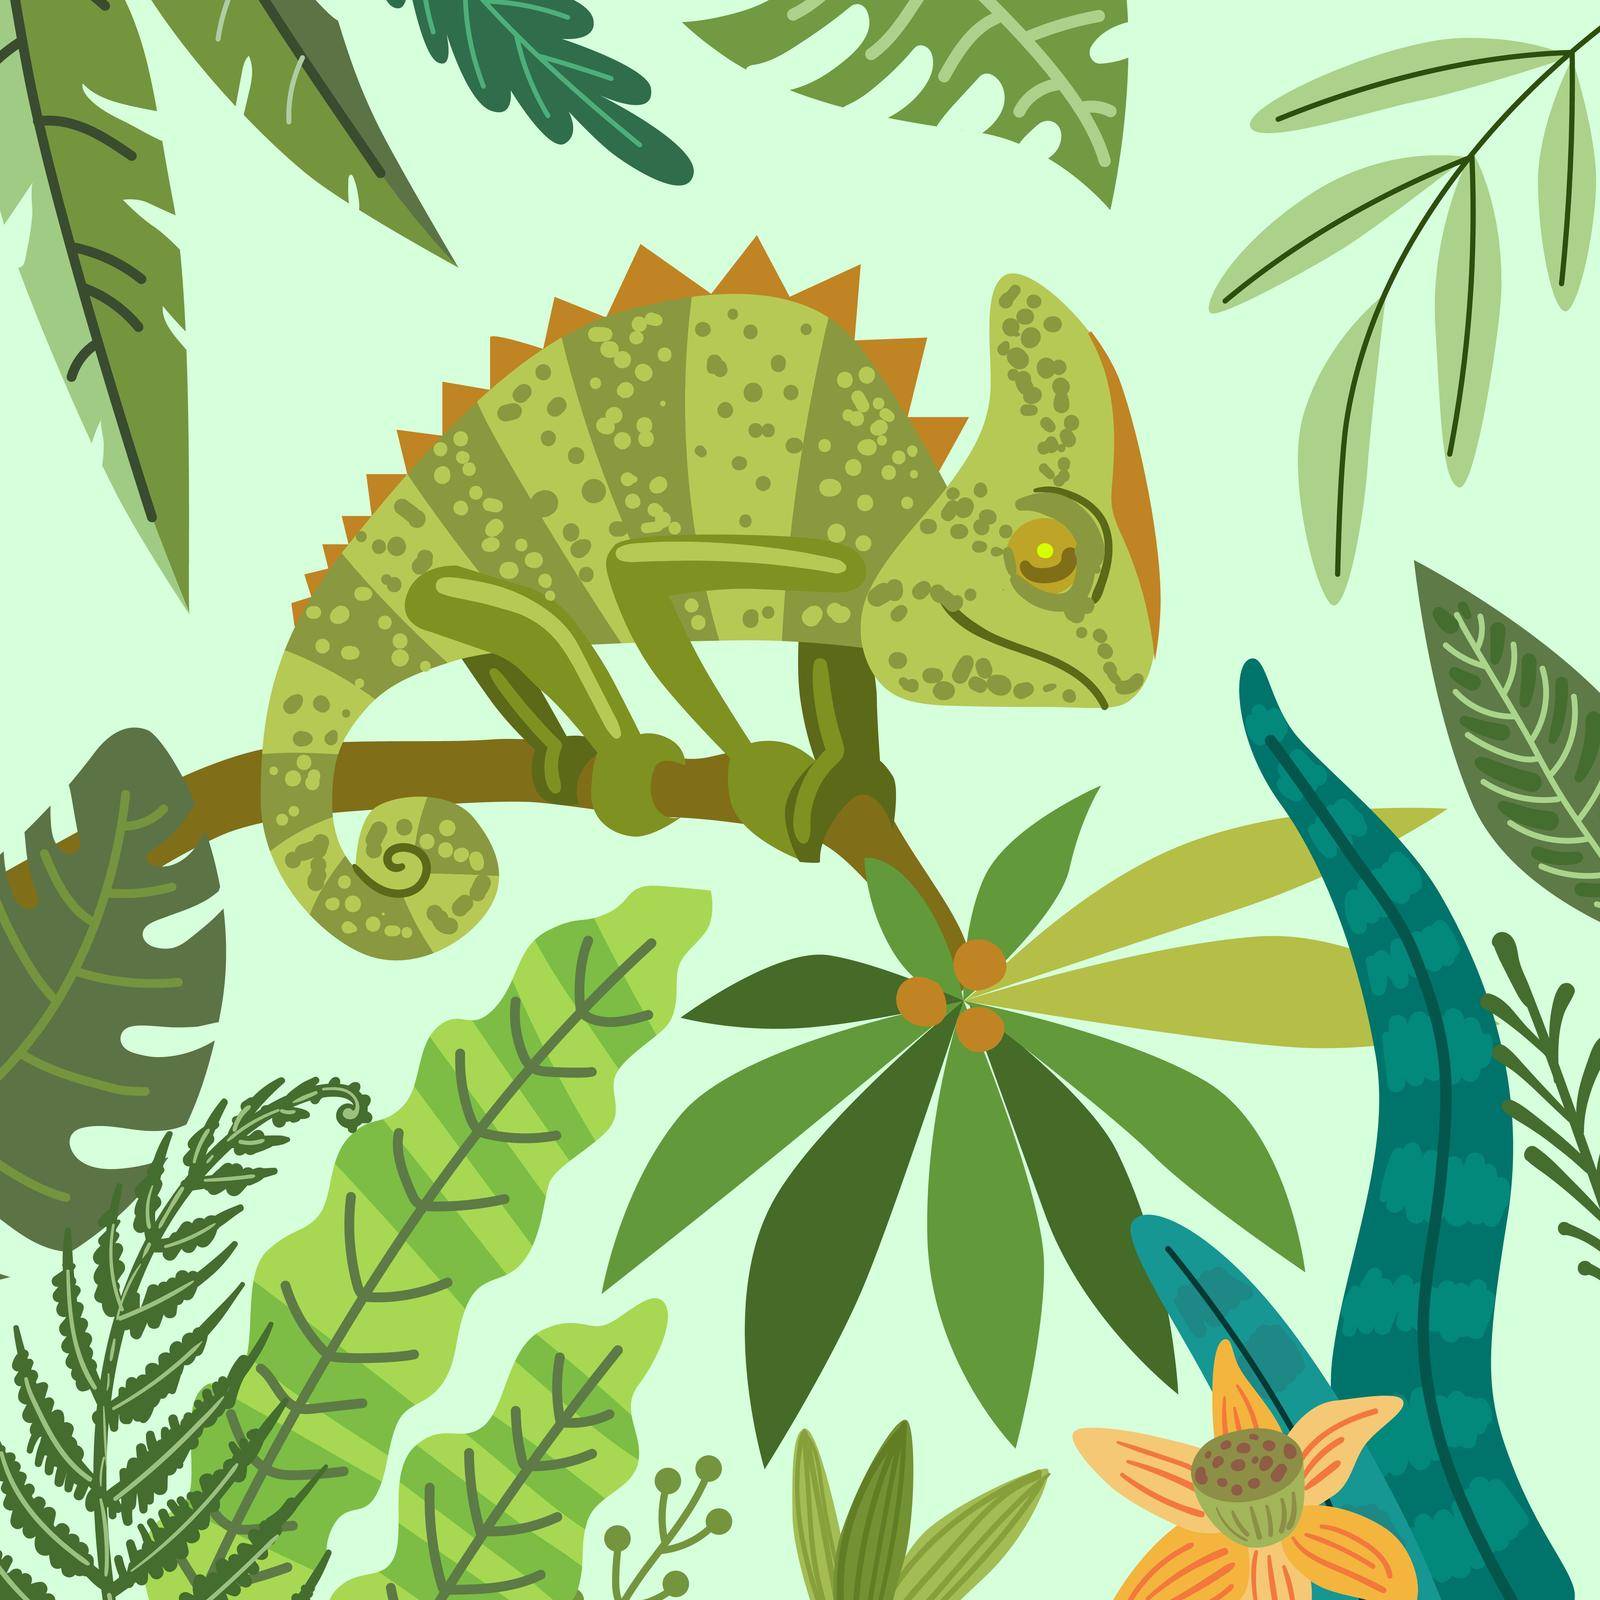 Chameleon illustration. Tropical animals vector. Beautiful animalistic composition. Good for your design.